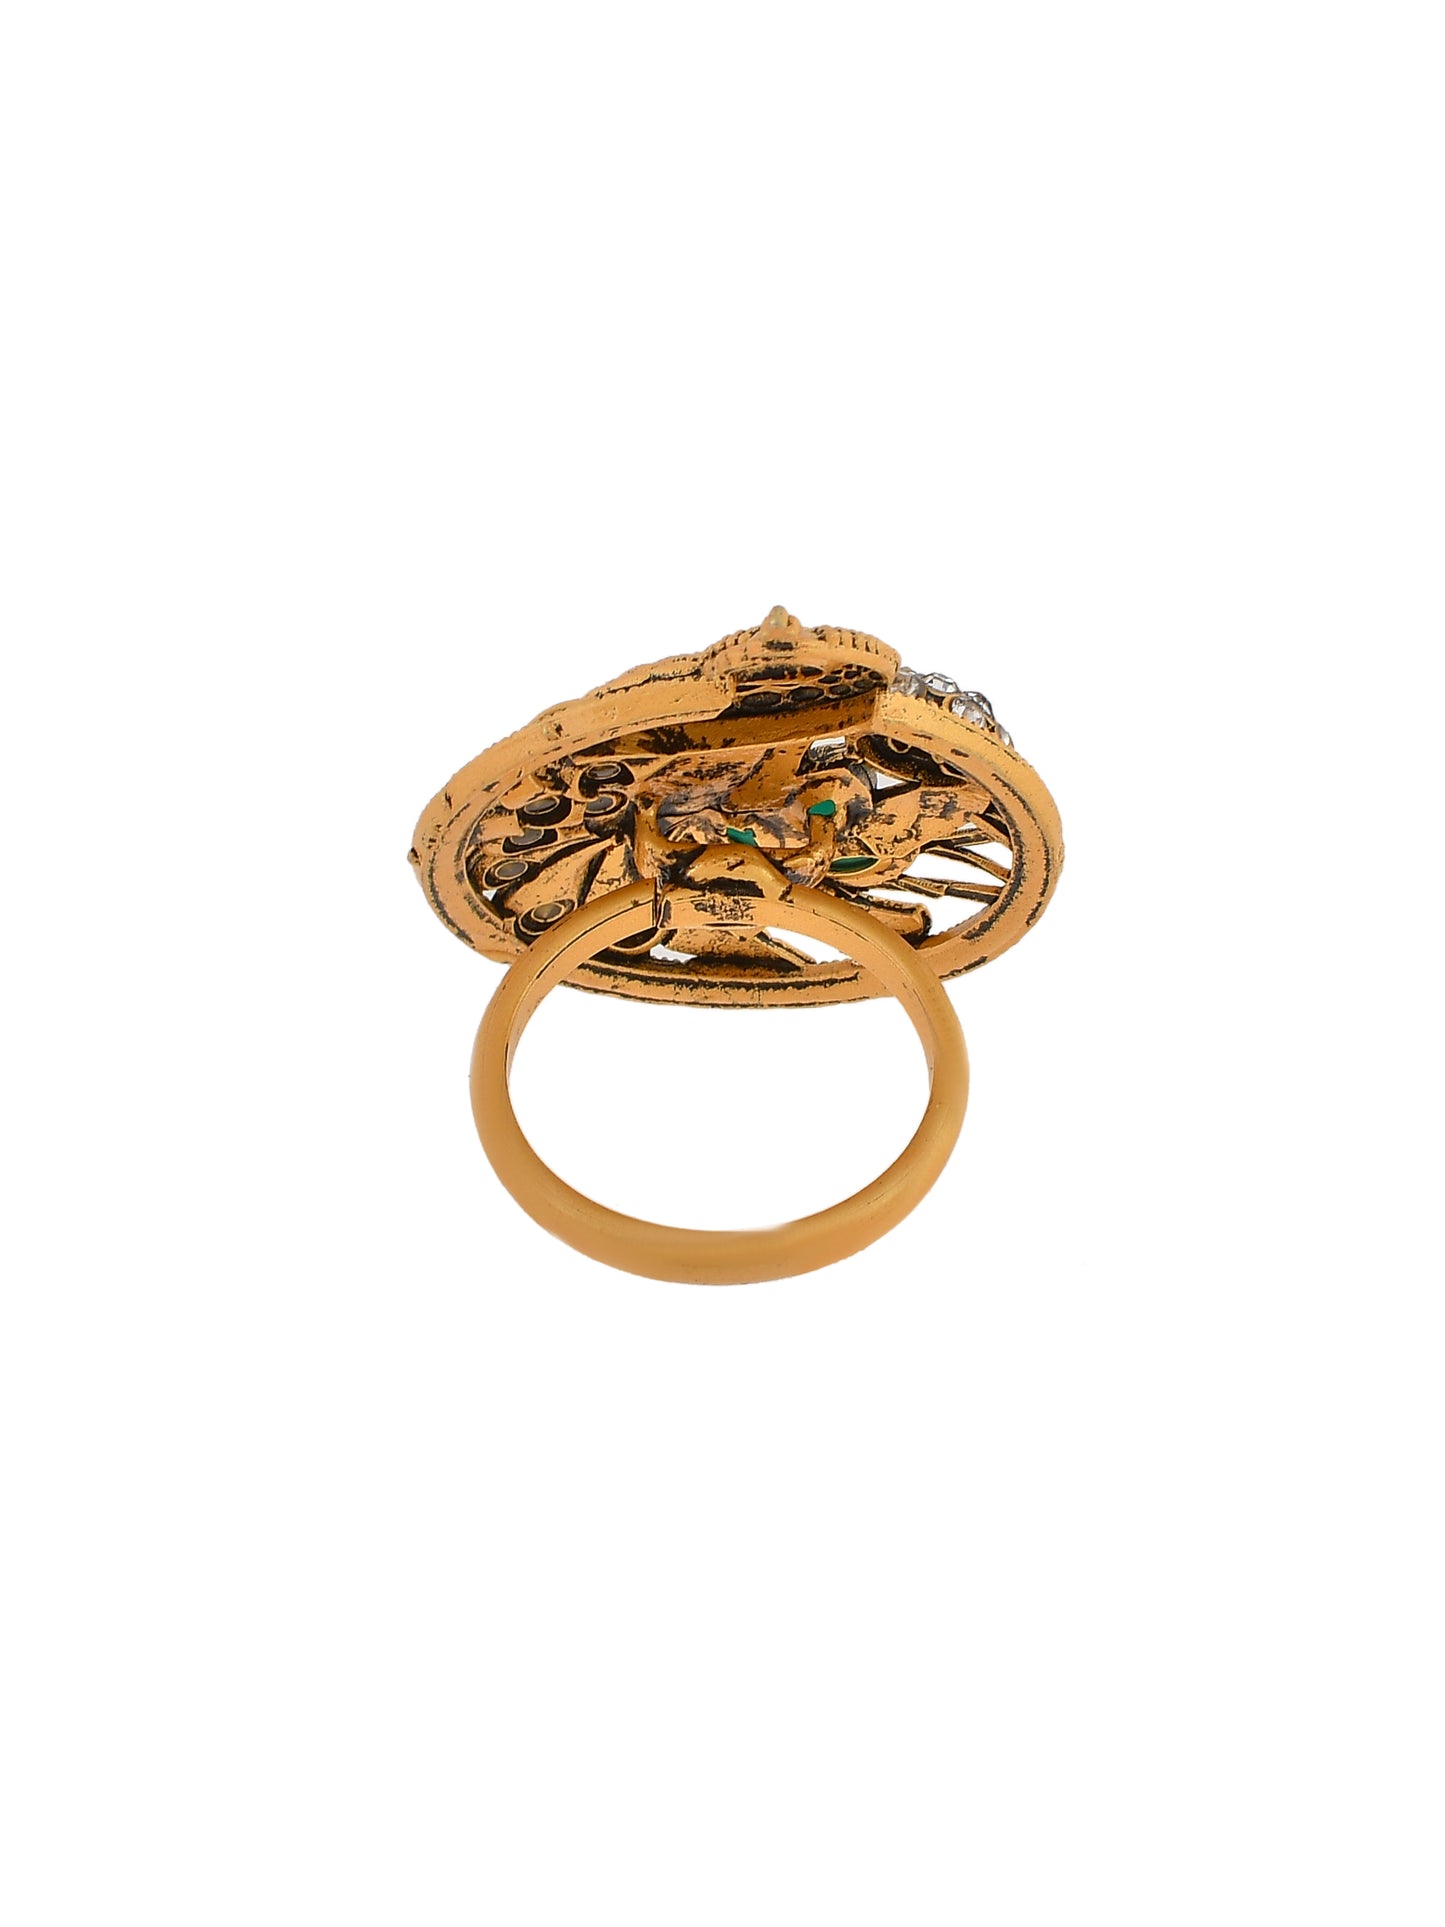 South Indian Gold Plated Adjustable Finger Ring